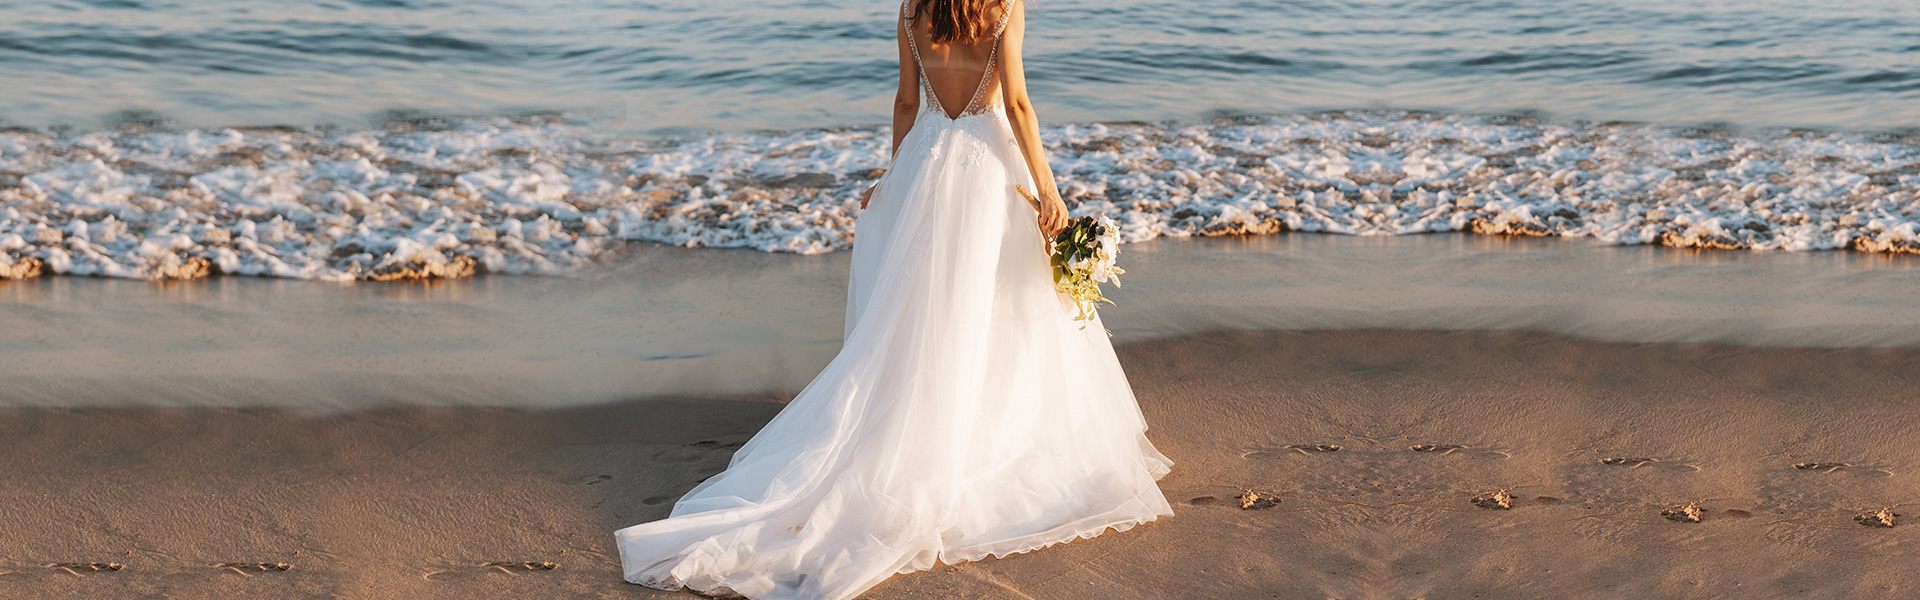 Bride in long dress looking out to the ocean